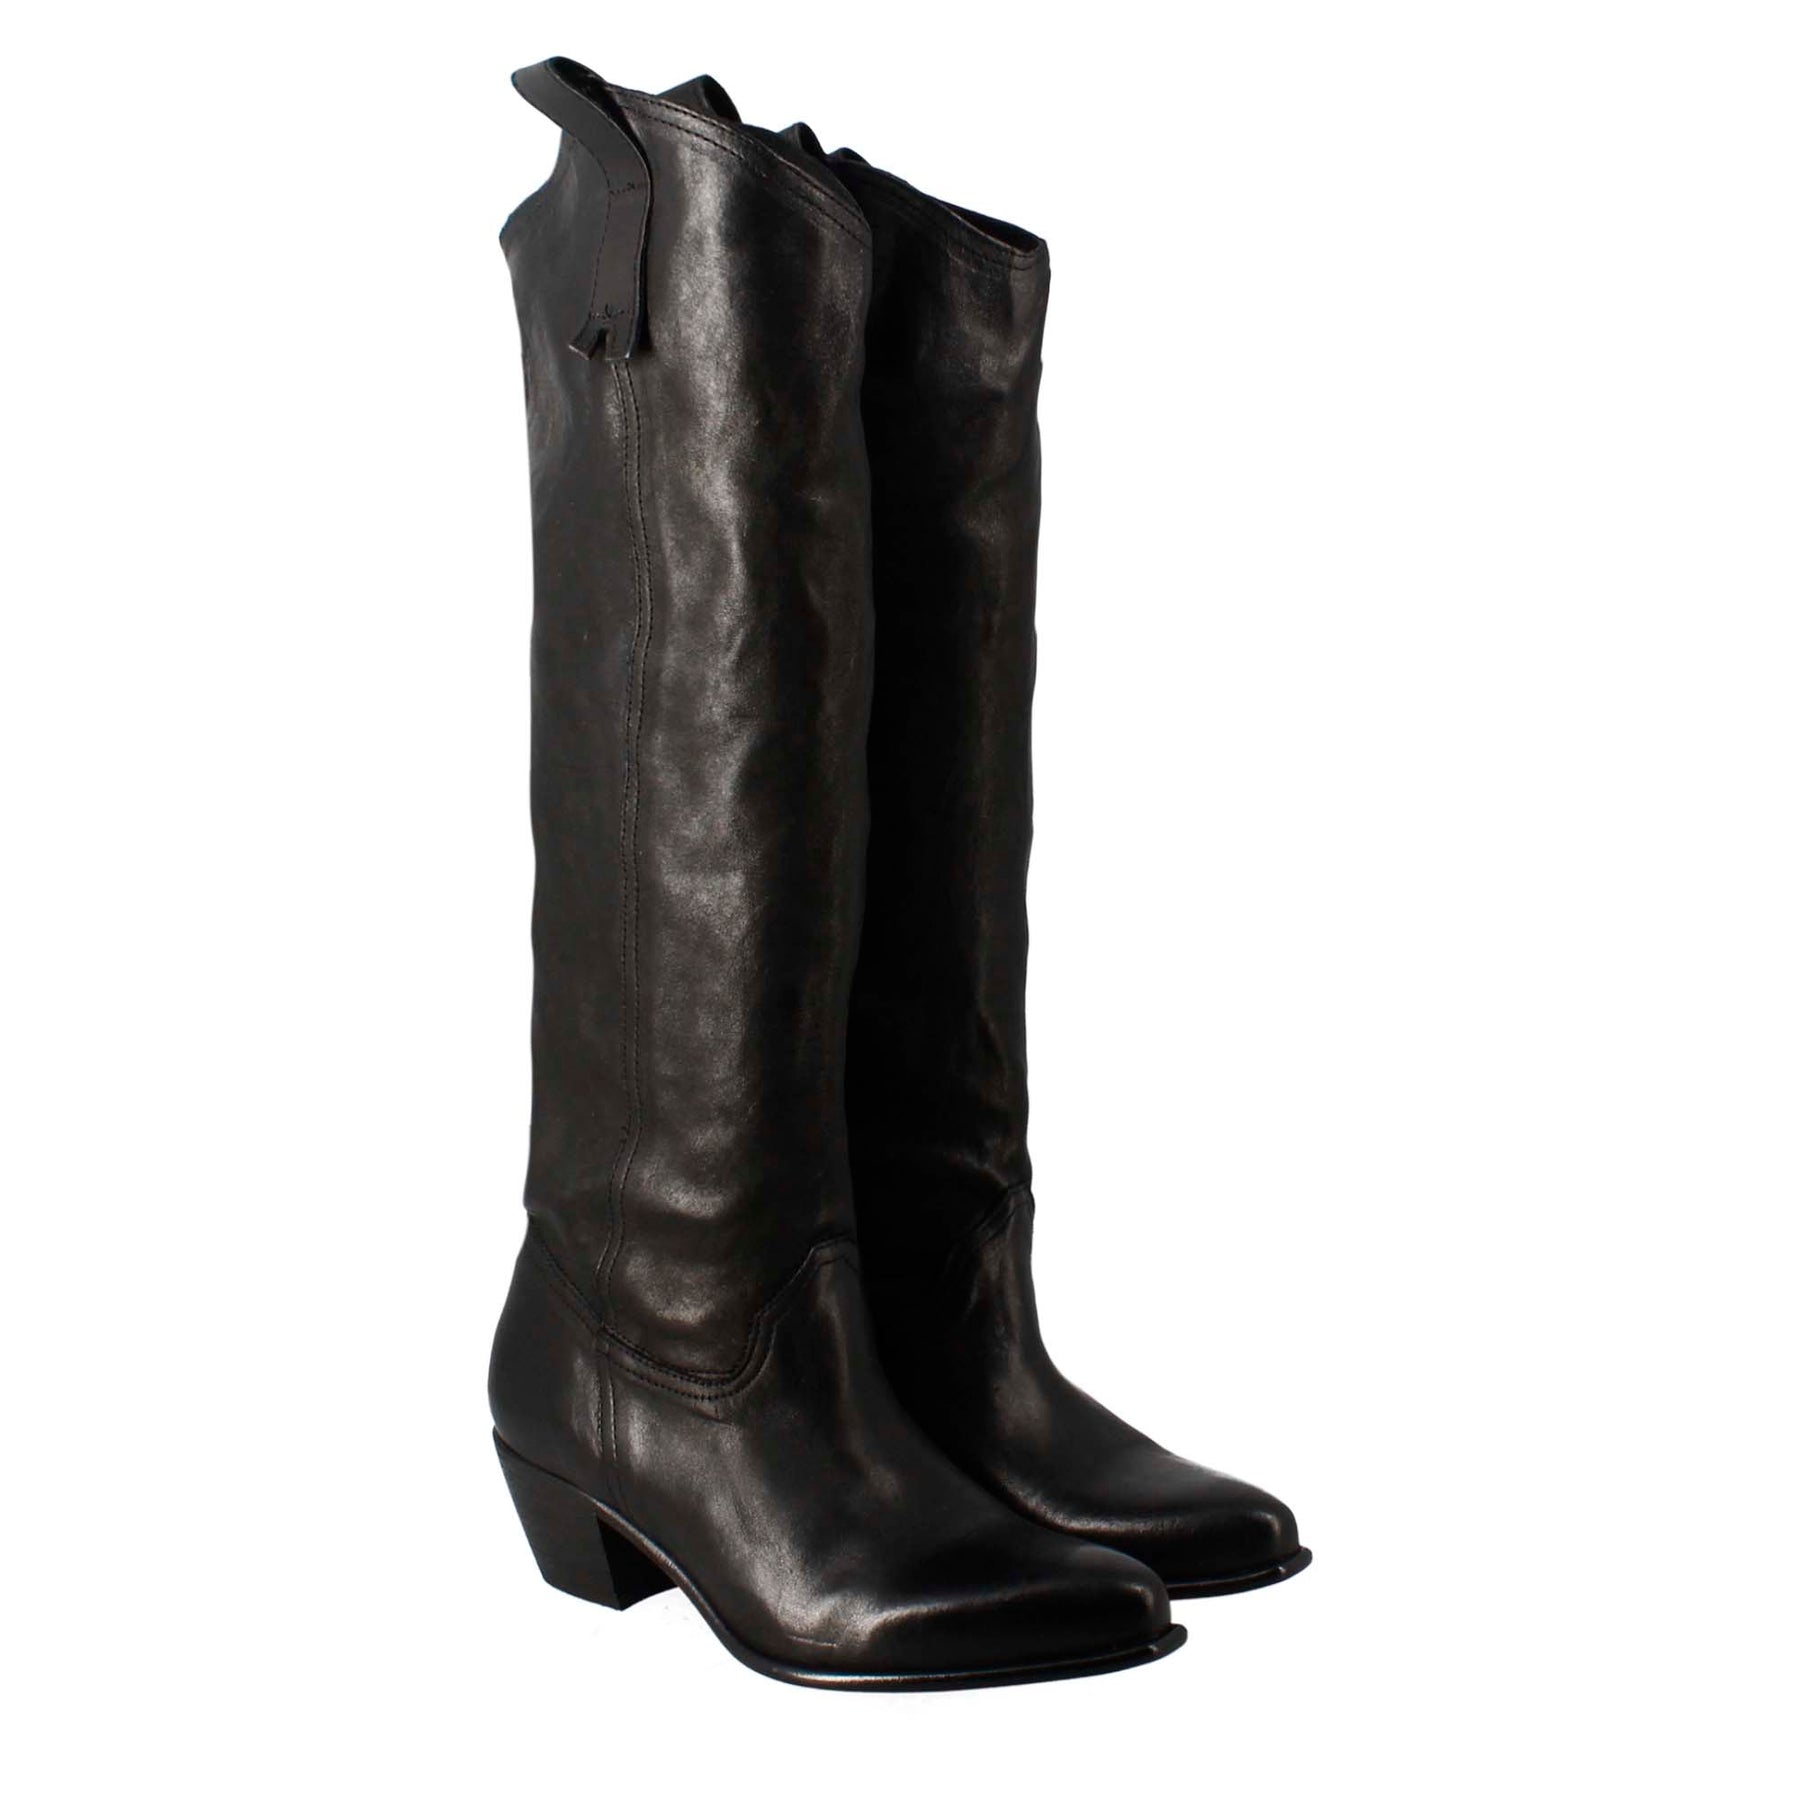 Women's handmade high Texan boots in black leather with zipper